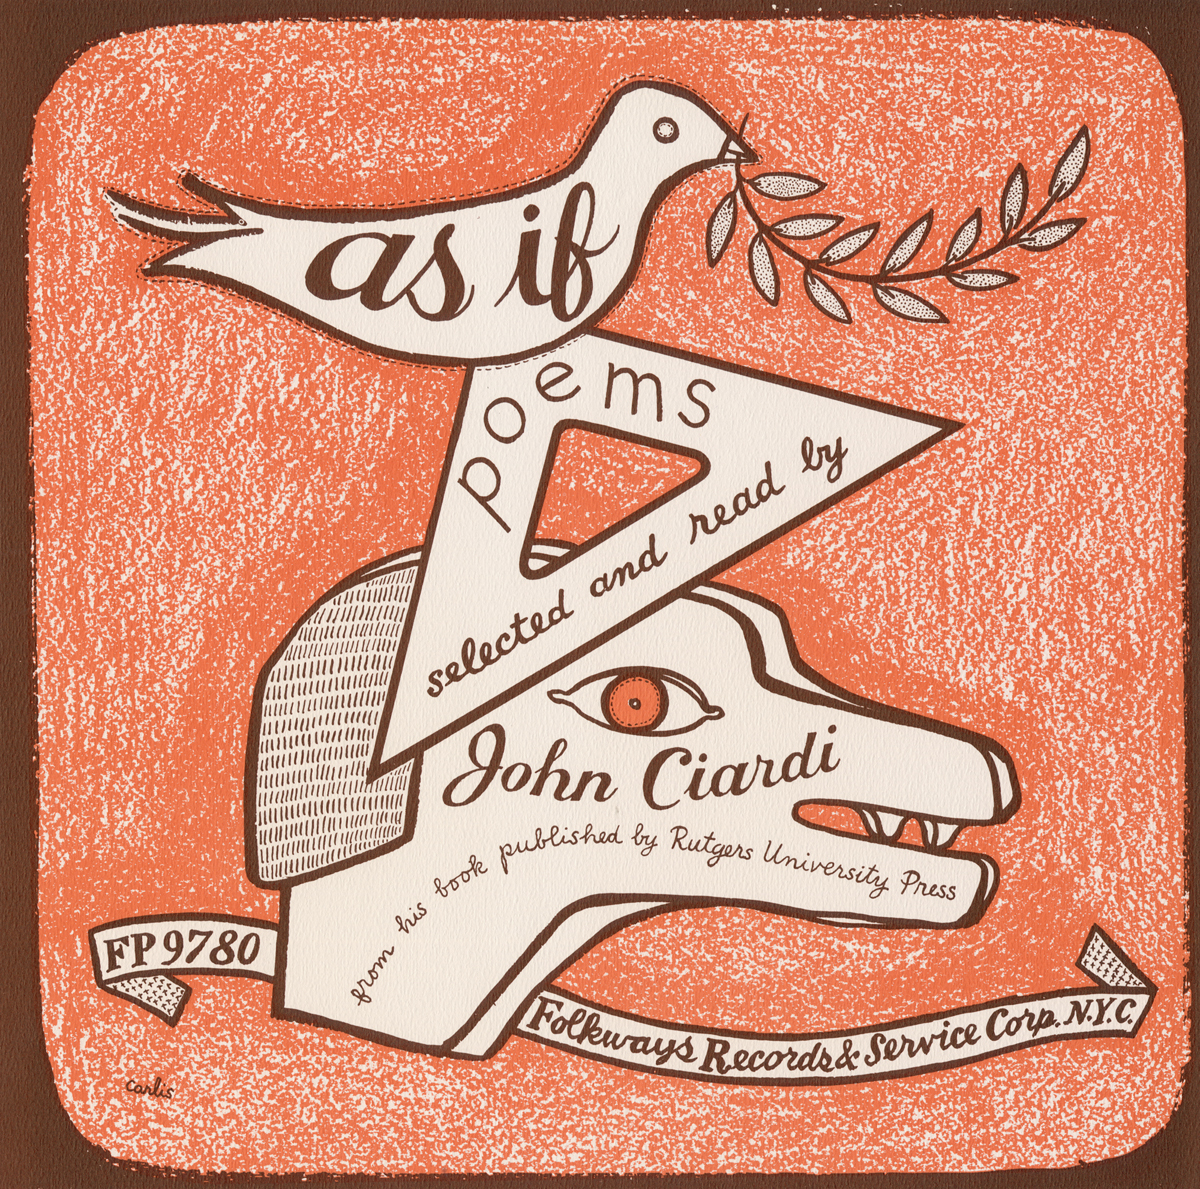 AS IF: POEMS, NEW AND SELECTED, BY JOHN CIARDI